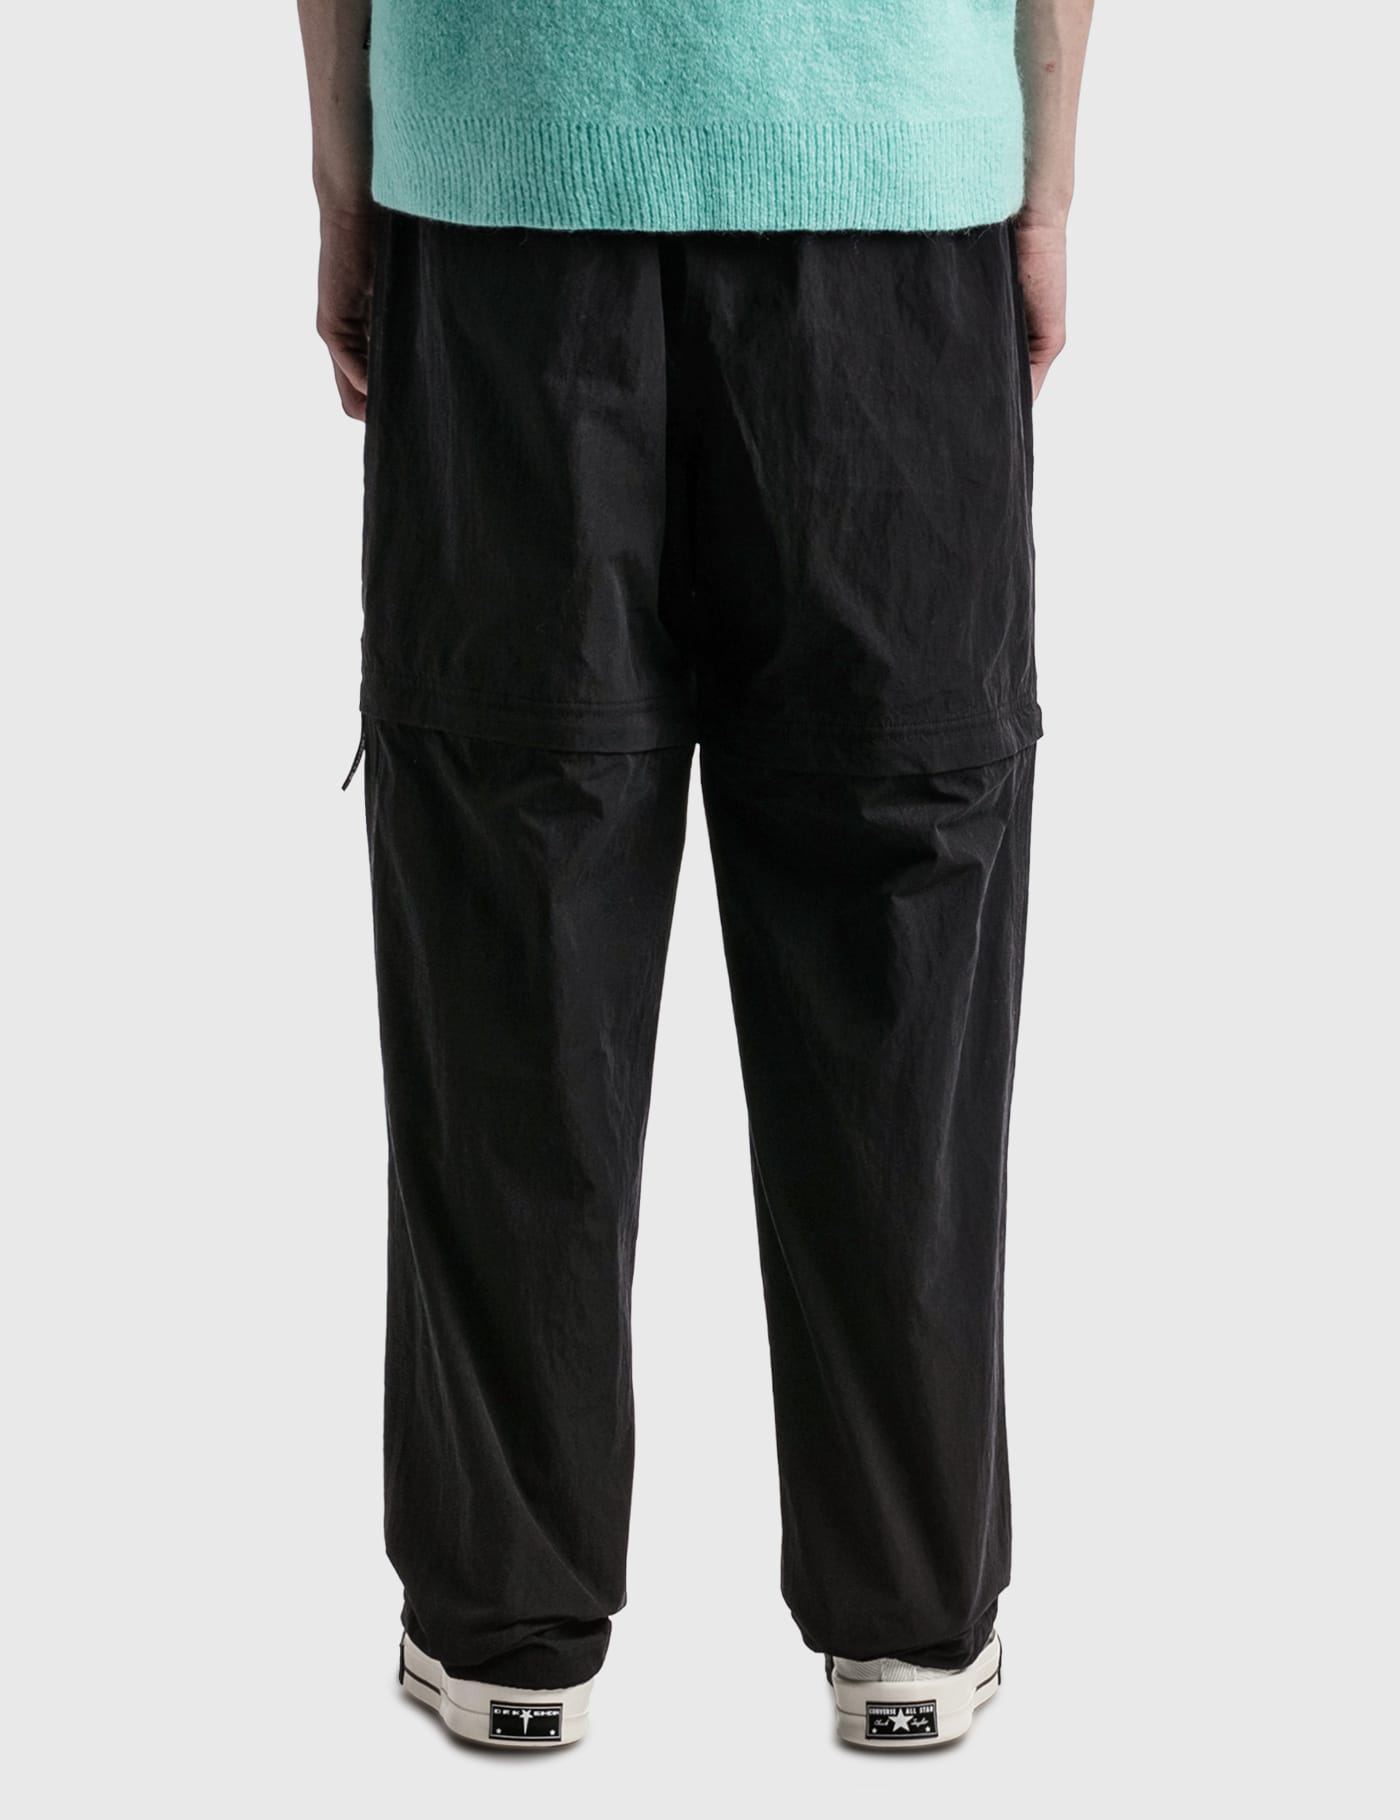 Stüssy - Nyco Convertible Pants | HBX - Globally Curated Fashion 